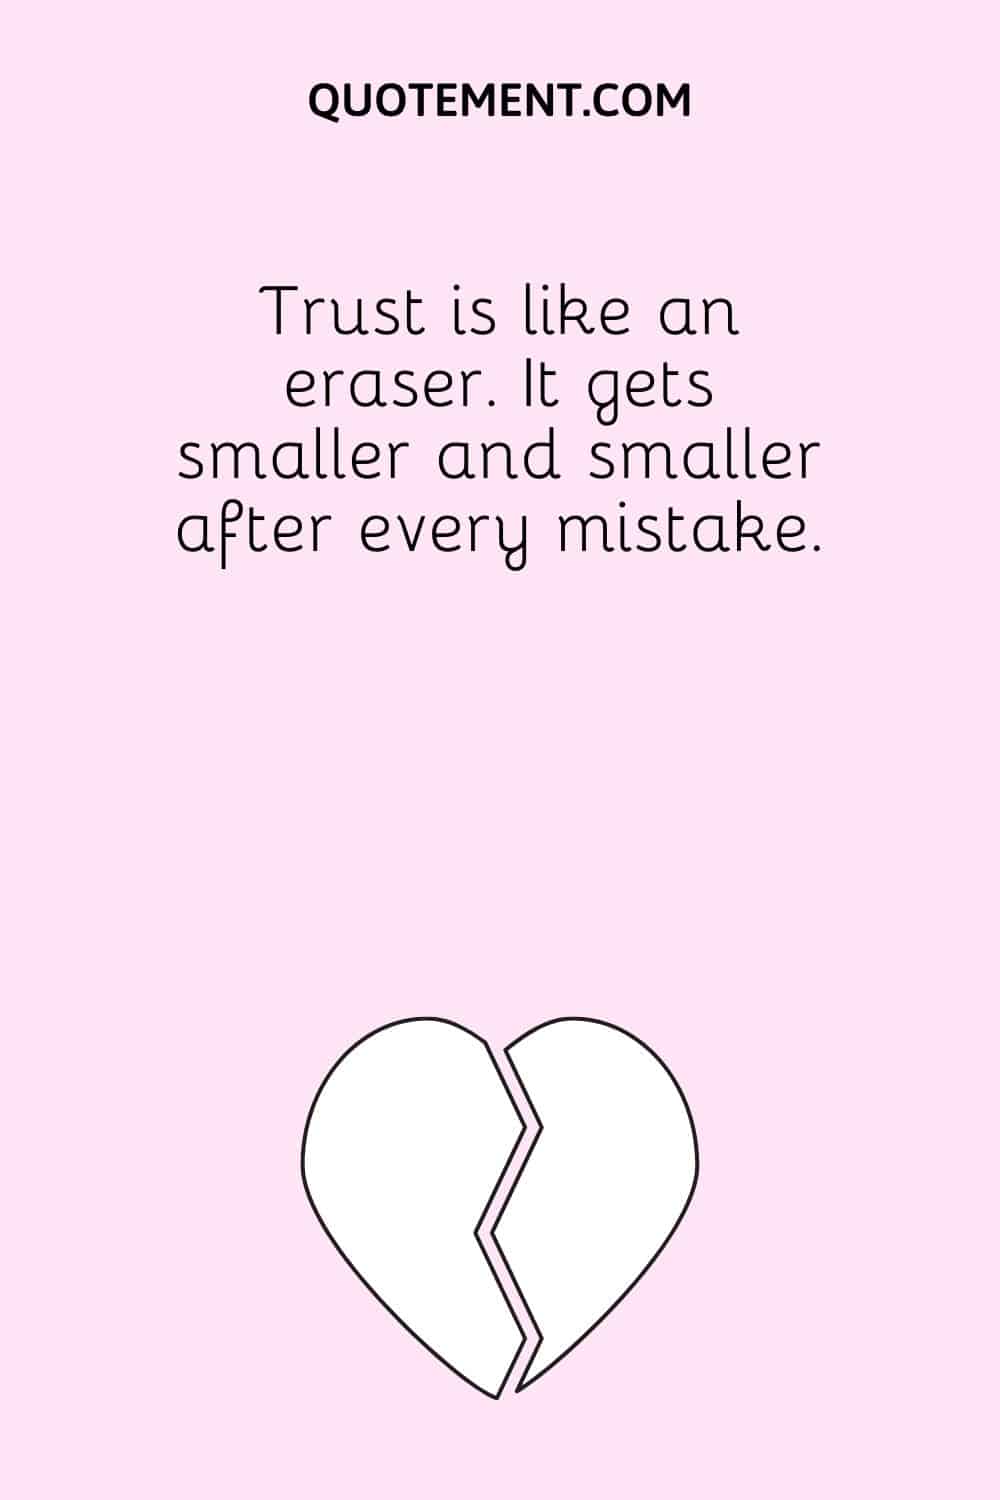 Trust is like an eraser. It gets smaller and smaller after every mistake.